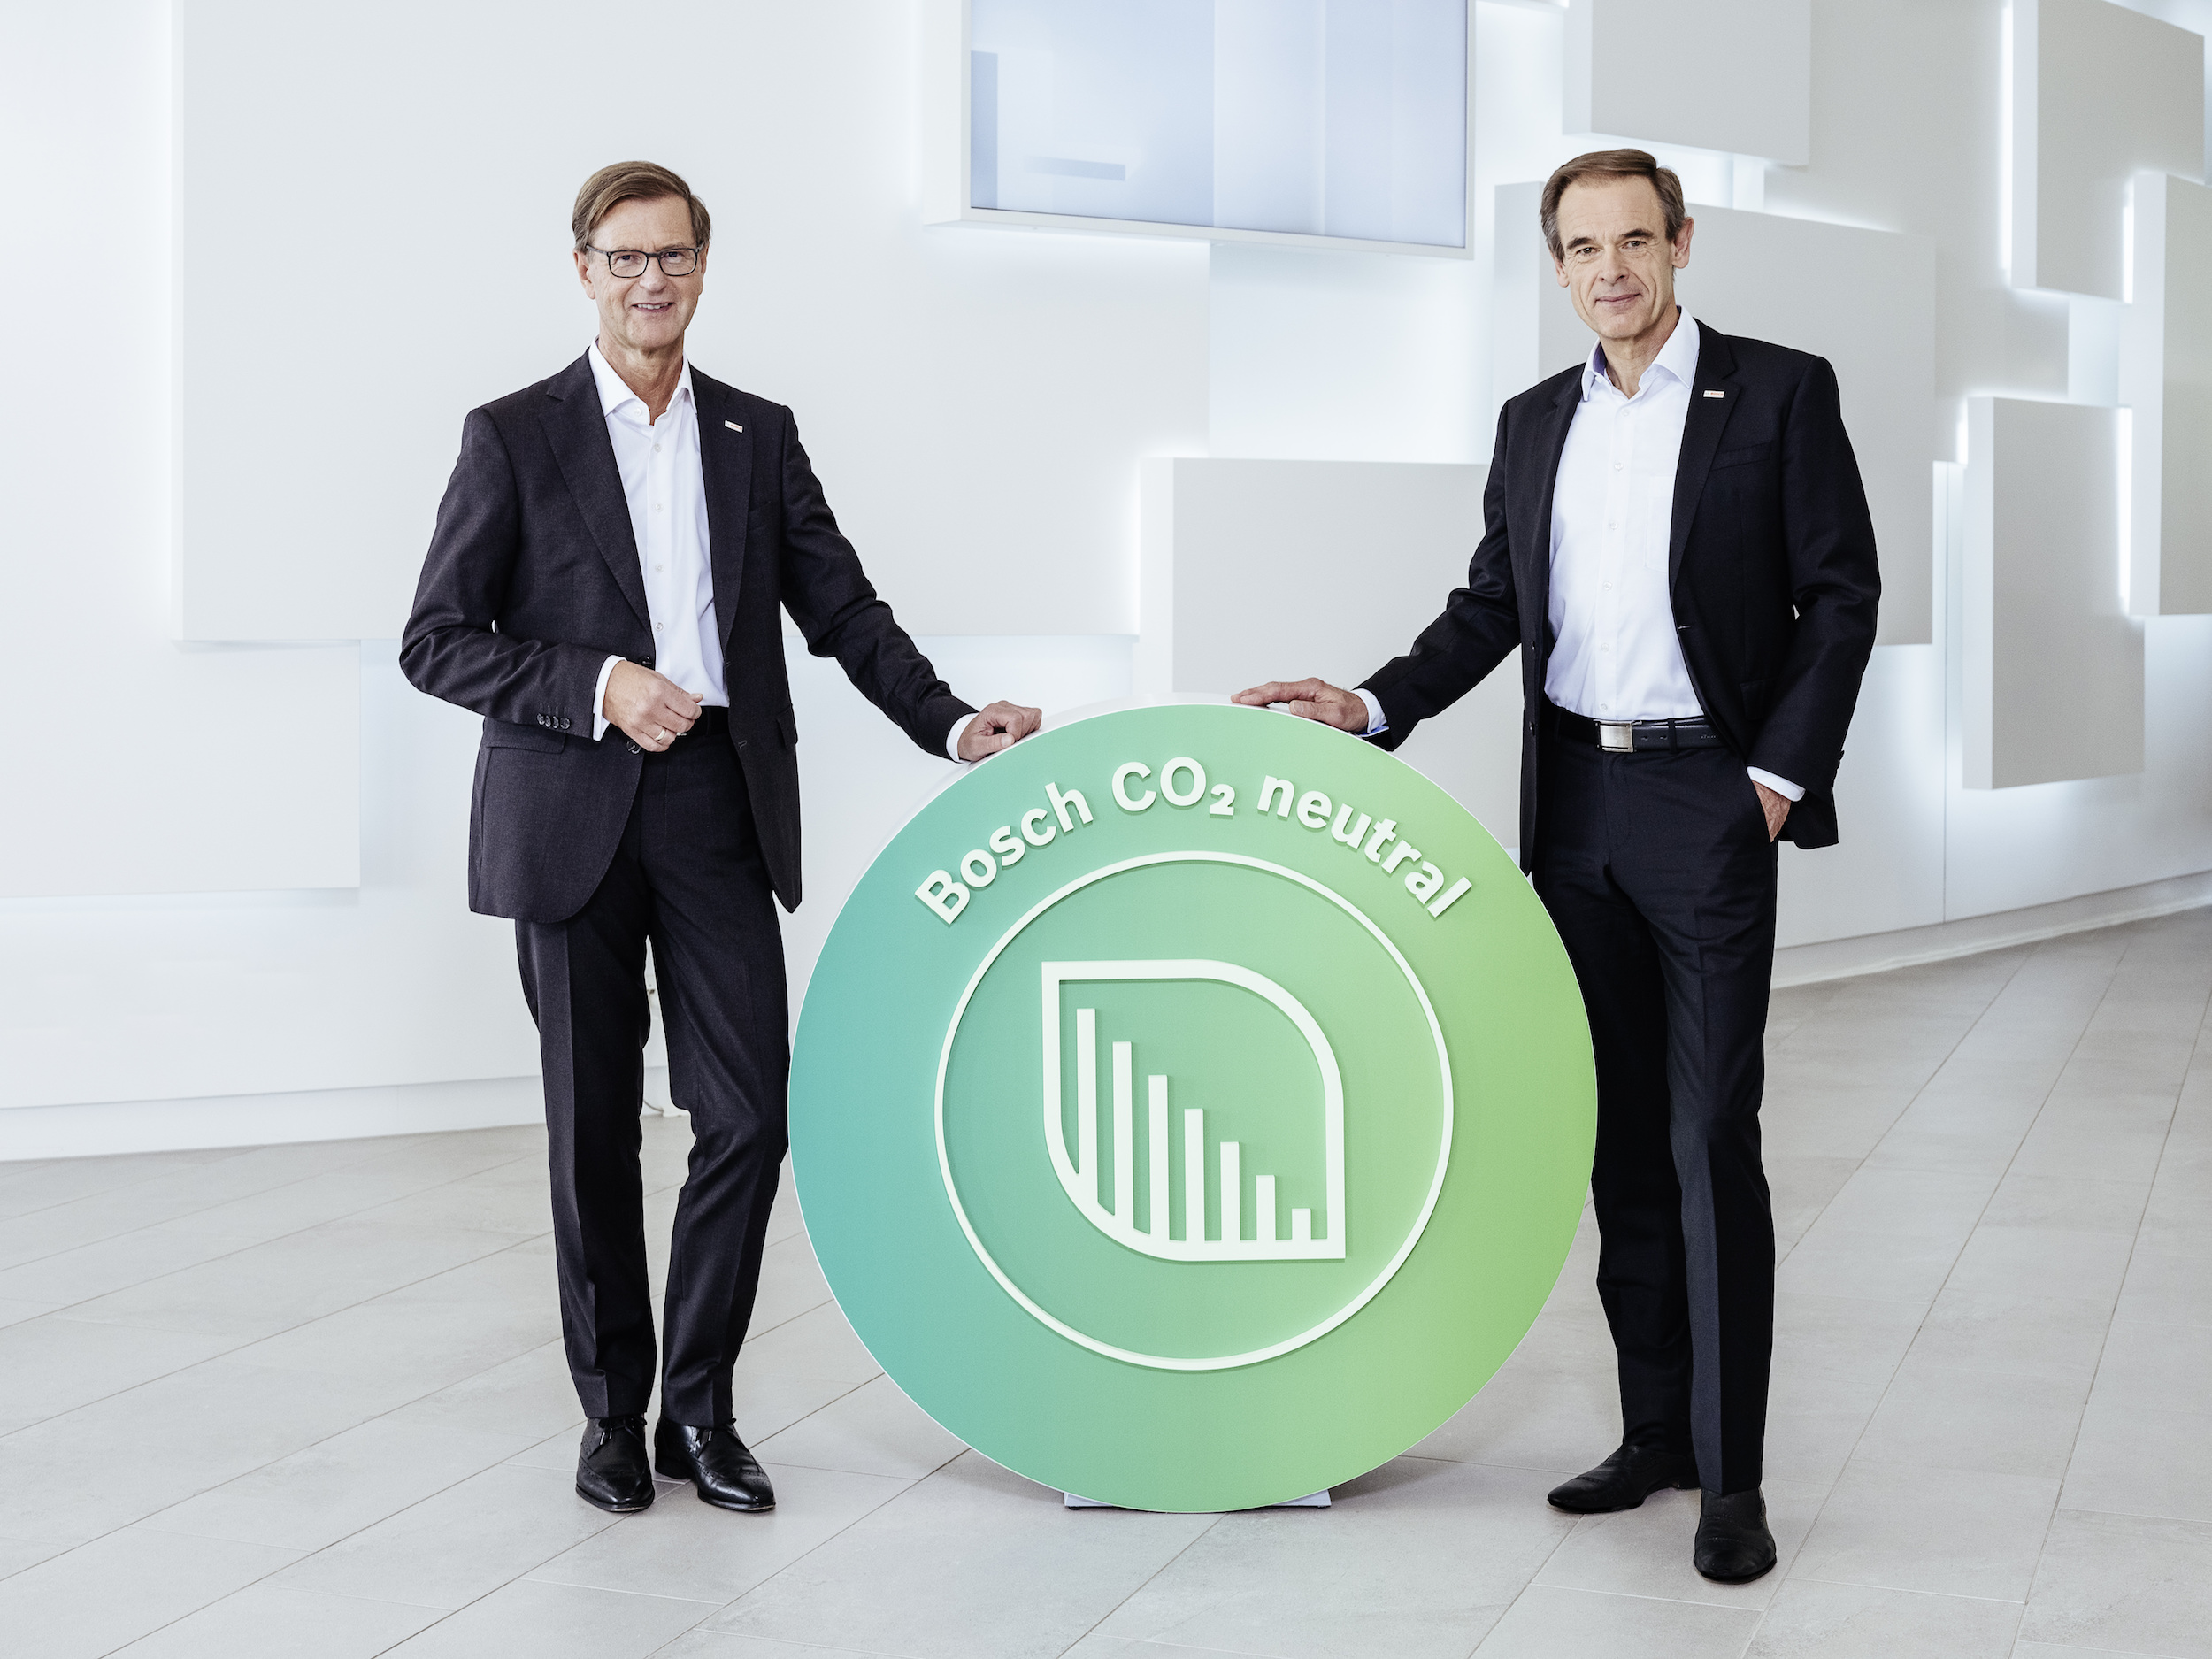 Annual press conference 2019: Bosch to be carbon neutral worldwide by 2020